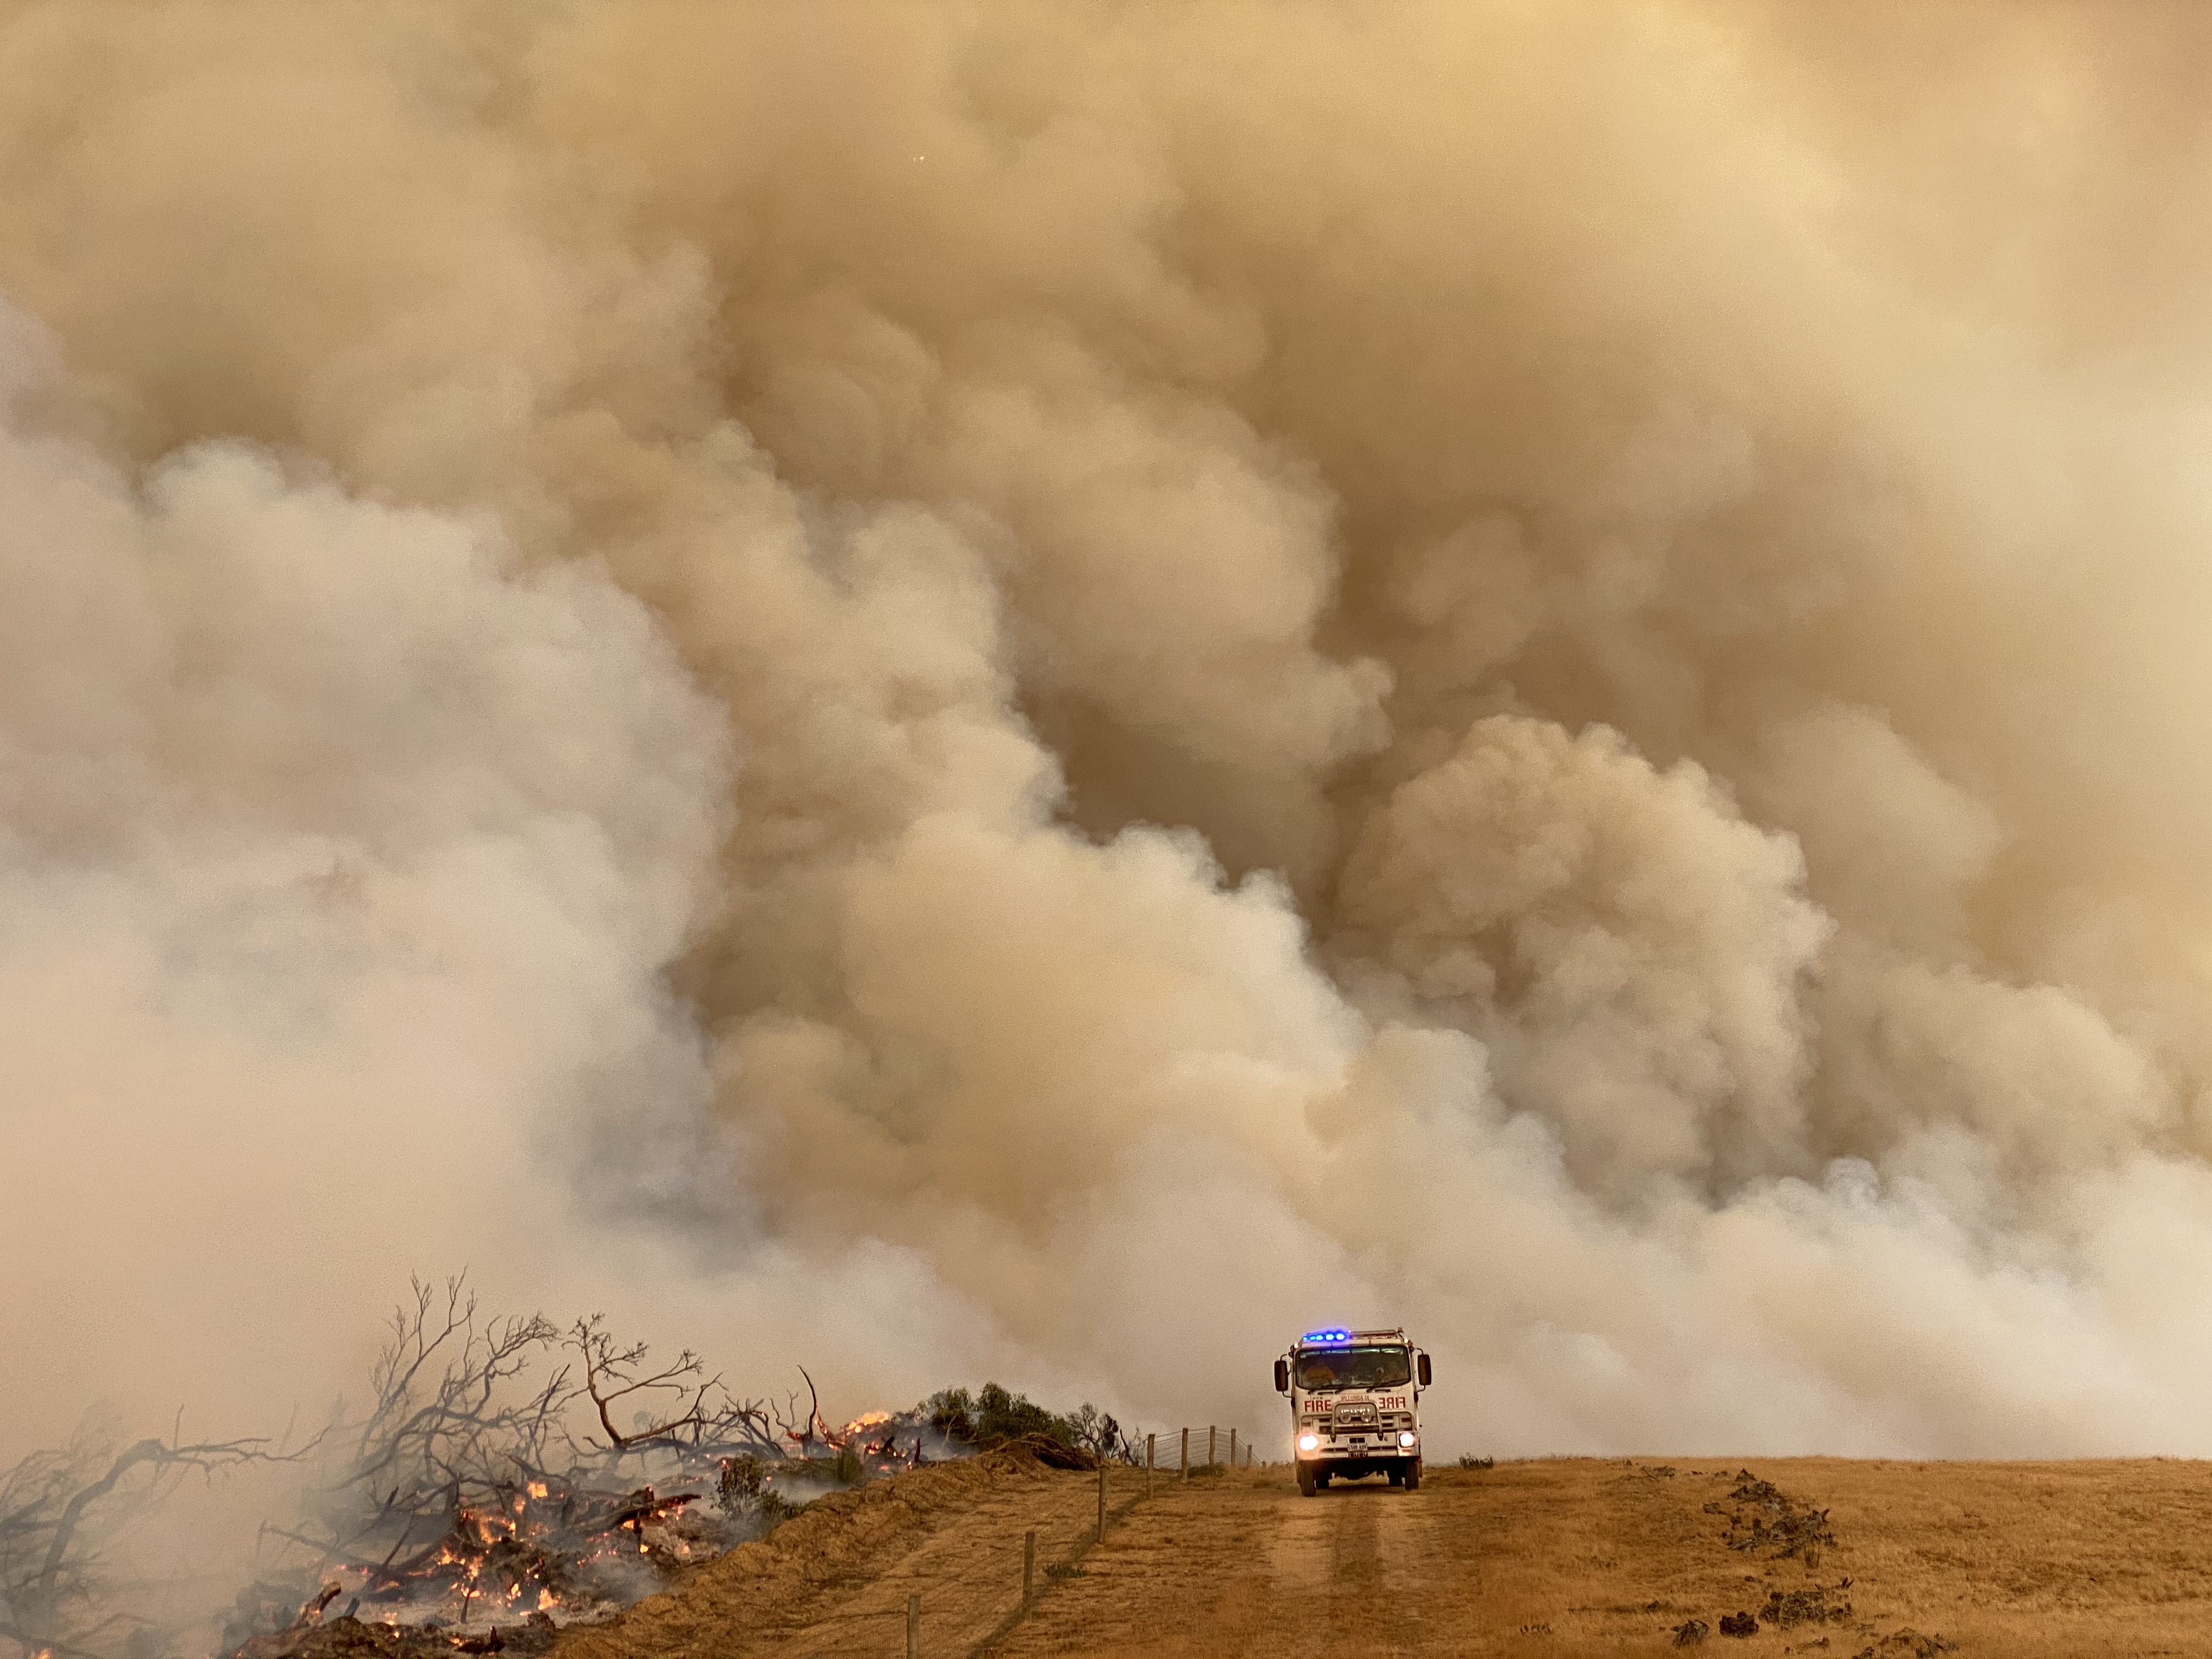 Fire truck drives across a burning landscape, with the sky full of brown smoke